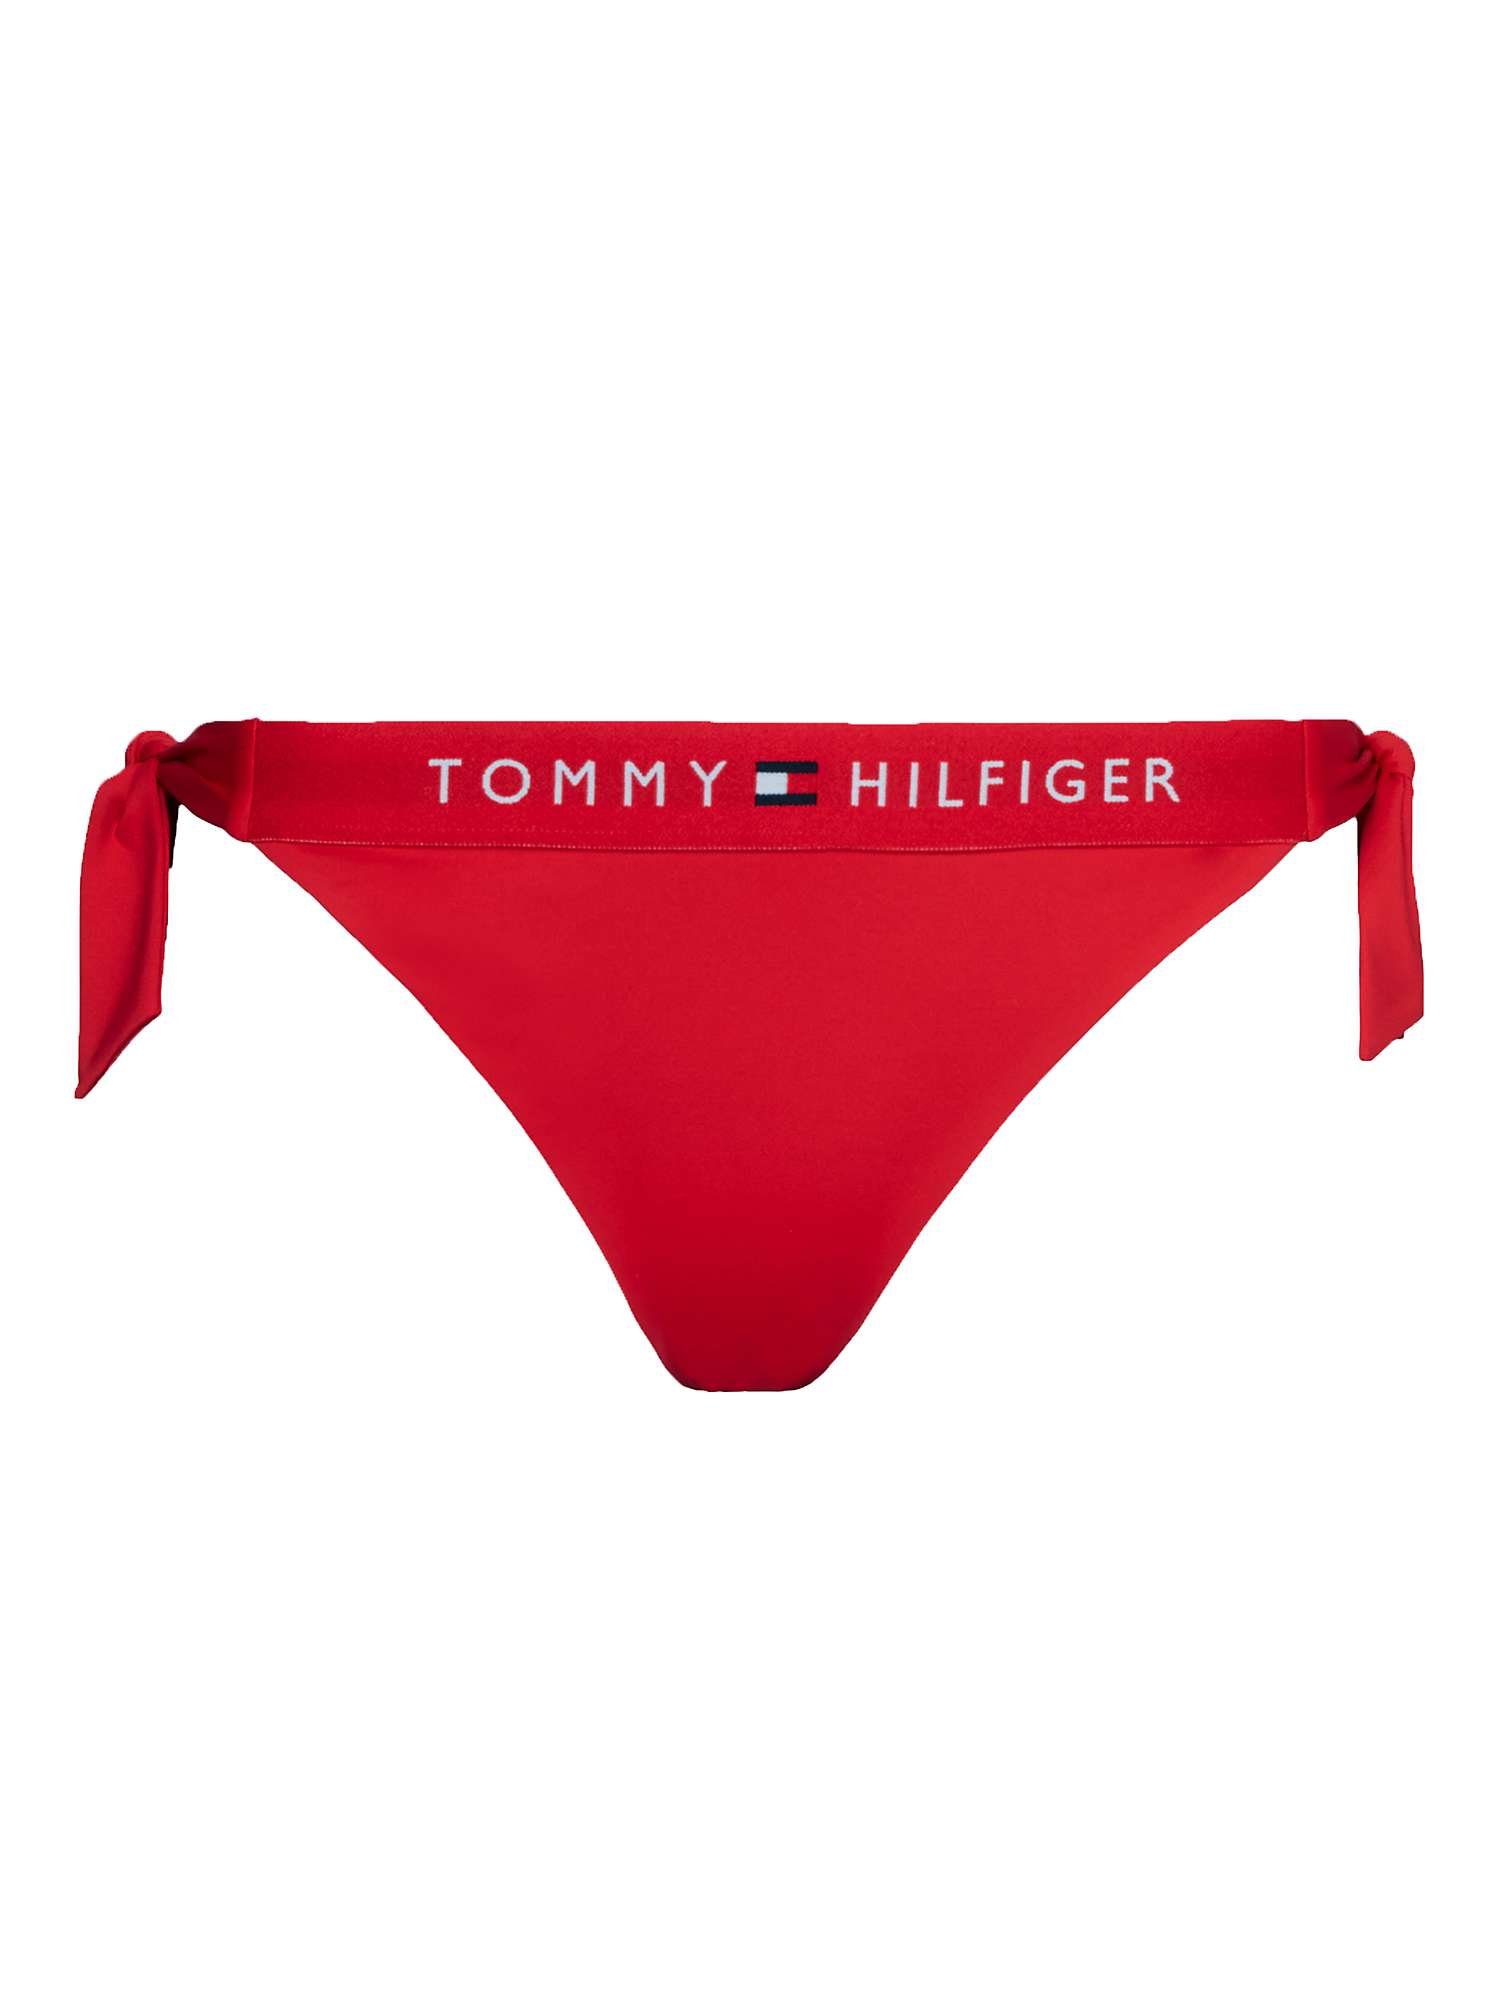 Buy Tommy Hilfiger Cheeky Side Tie Bikini Bottoms, Primary Red Online at johnlewis.com